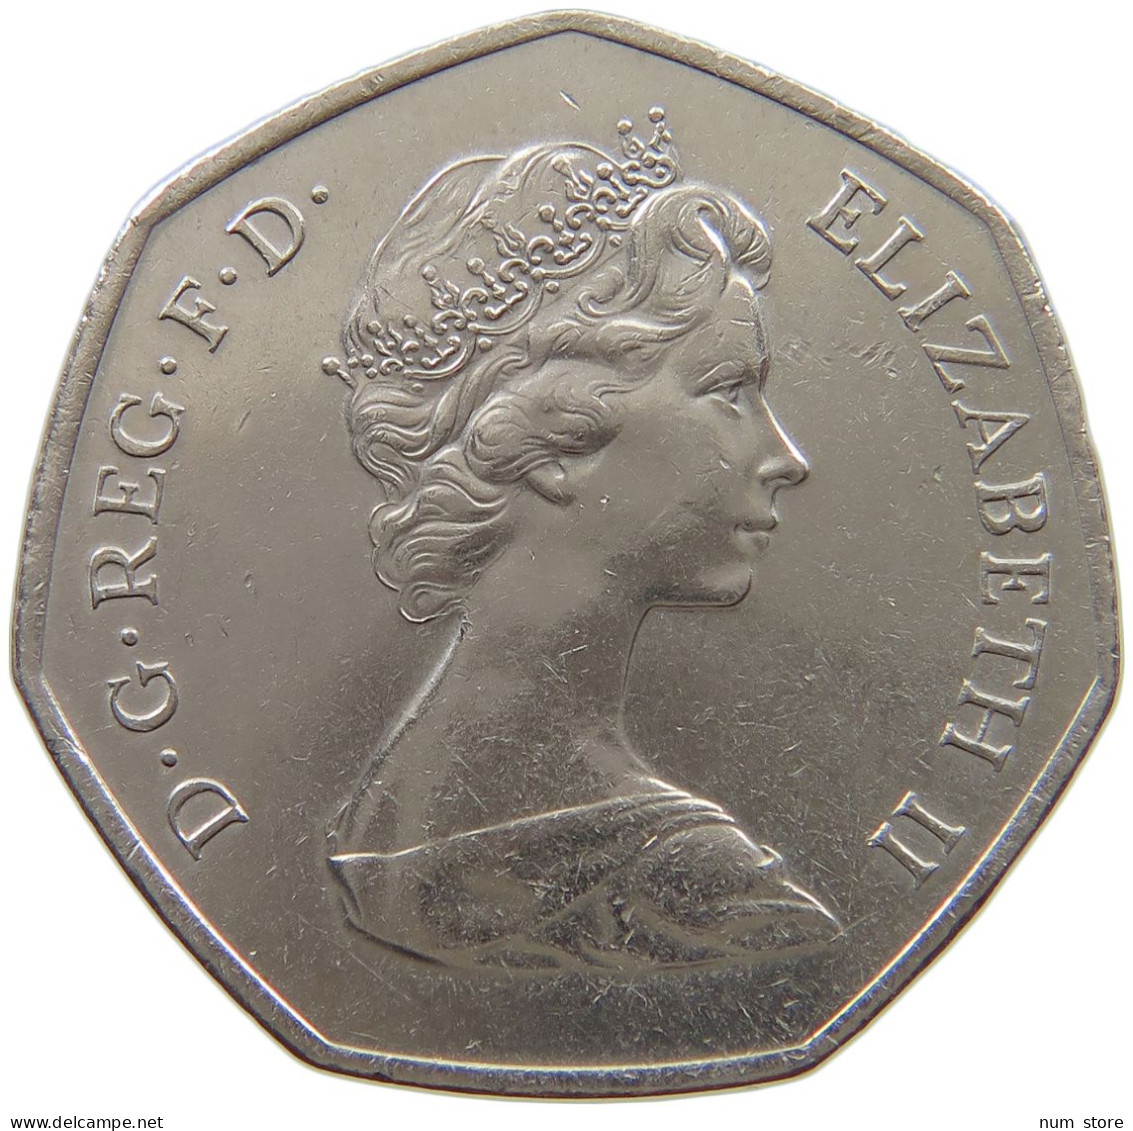 GREAT BRITAIN 50 PENCE 1973 #a071 0731 - 50 Pence